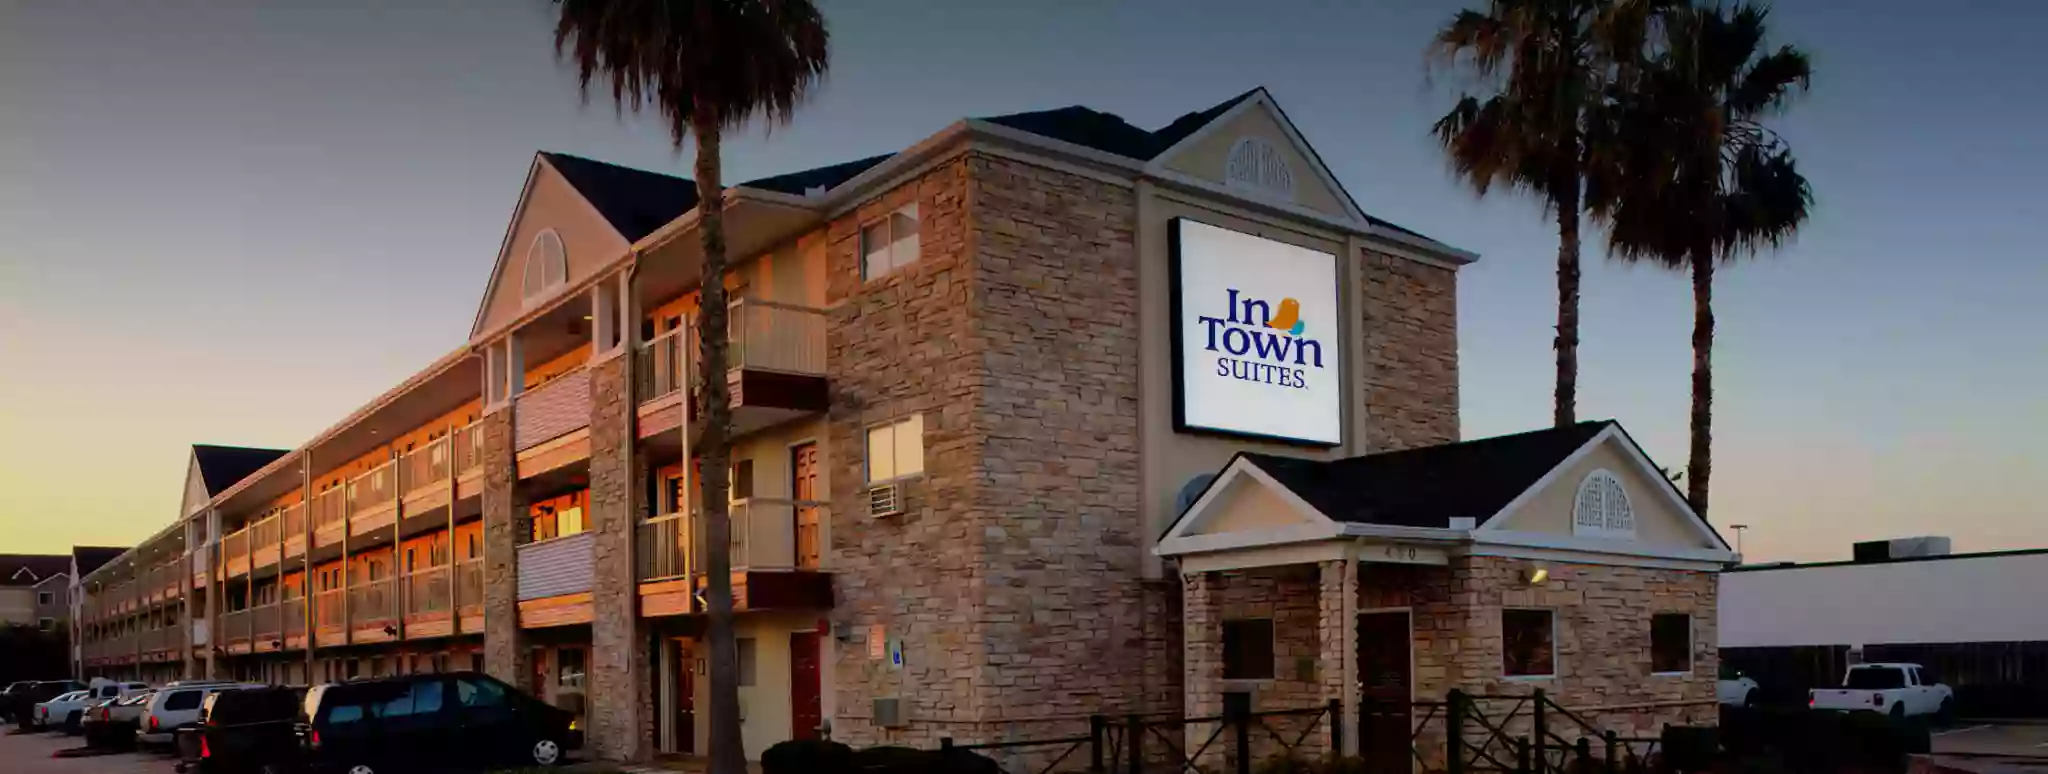 InTown Suites Extended Stay Chesapeake VA - Greenbrier Road